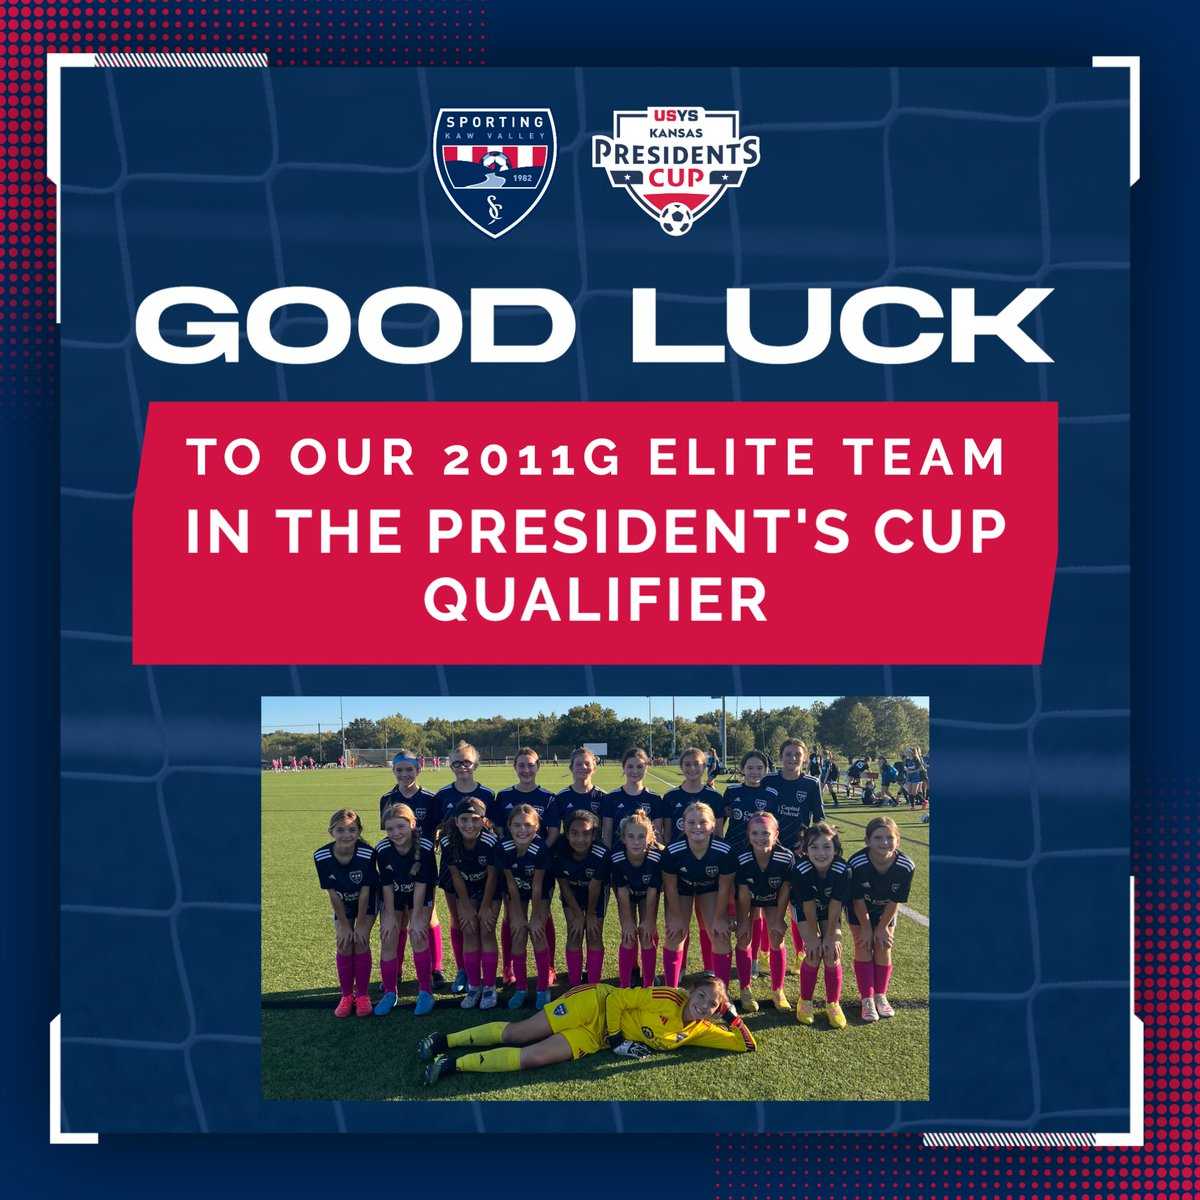 𝙂𝙤𝙤𝙙 𝙇𝙪𝙘𝙠 to our 2011G Elite team competing in the President's Cup qualifier game on April 10! 🤩

#TheValleyWay | #SportingKC

#manhattanks #topekaks #kusoccer #kstatesoccer #jayhawksoccer #threecitiesoneclub #playerdevelopment #playfirst #hometownclub